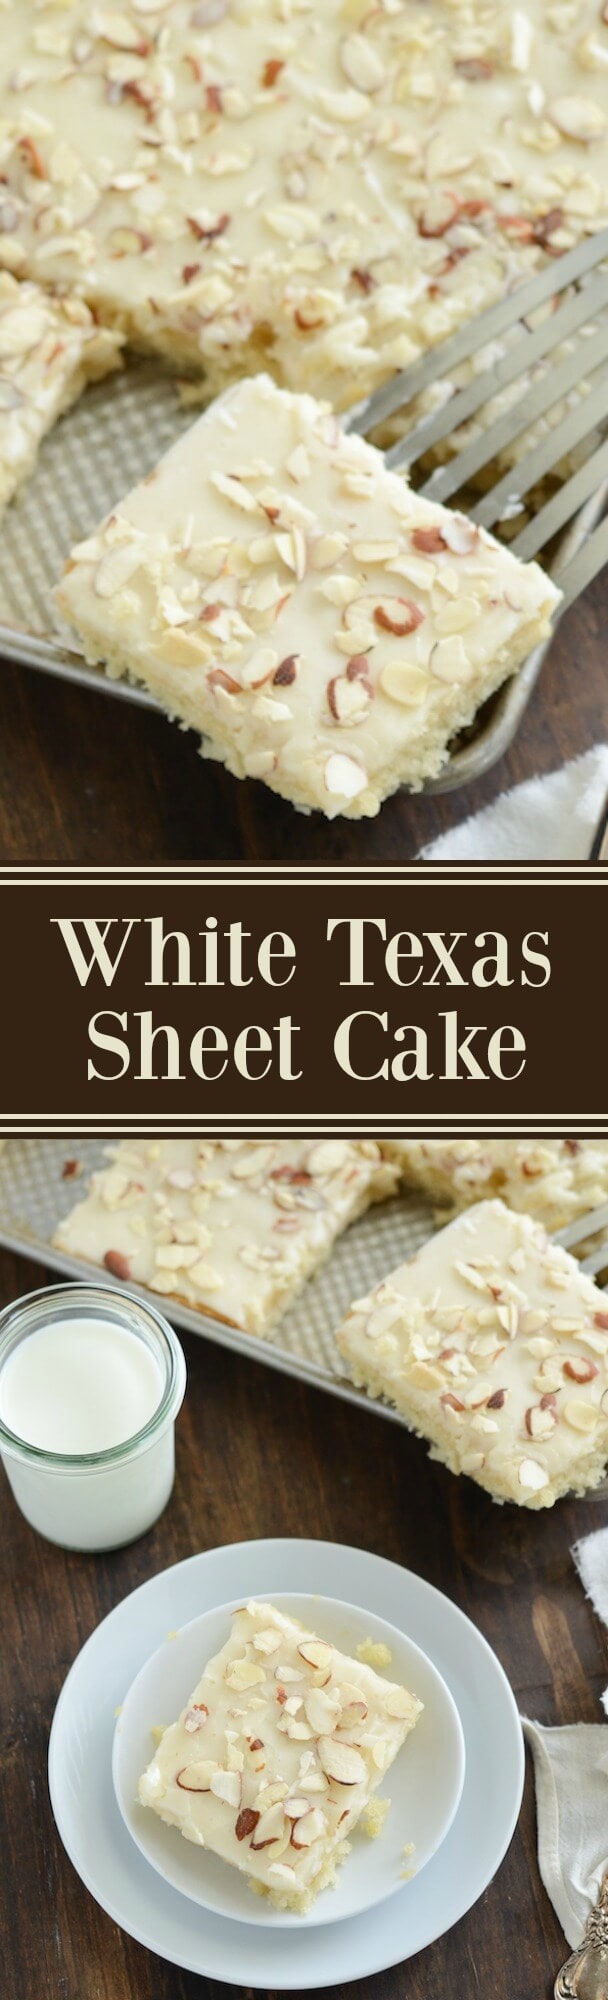 White Texas Almond Sheet Cake! This perfect buttery cake only takes 30 minutes from start to finish! 